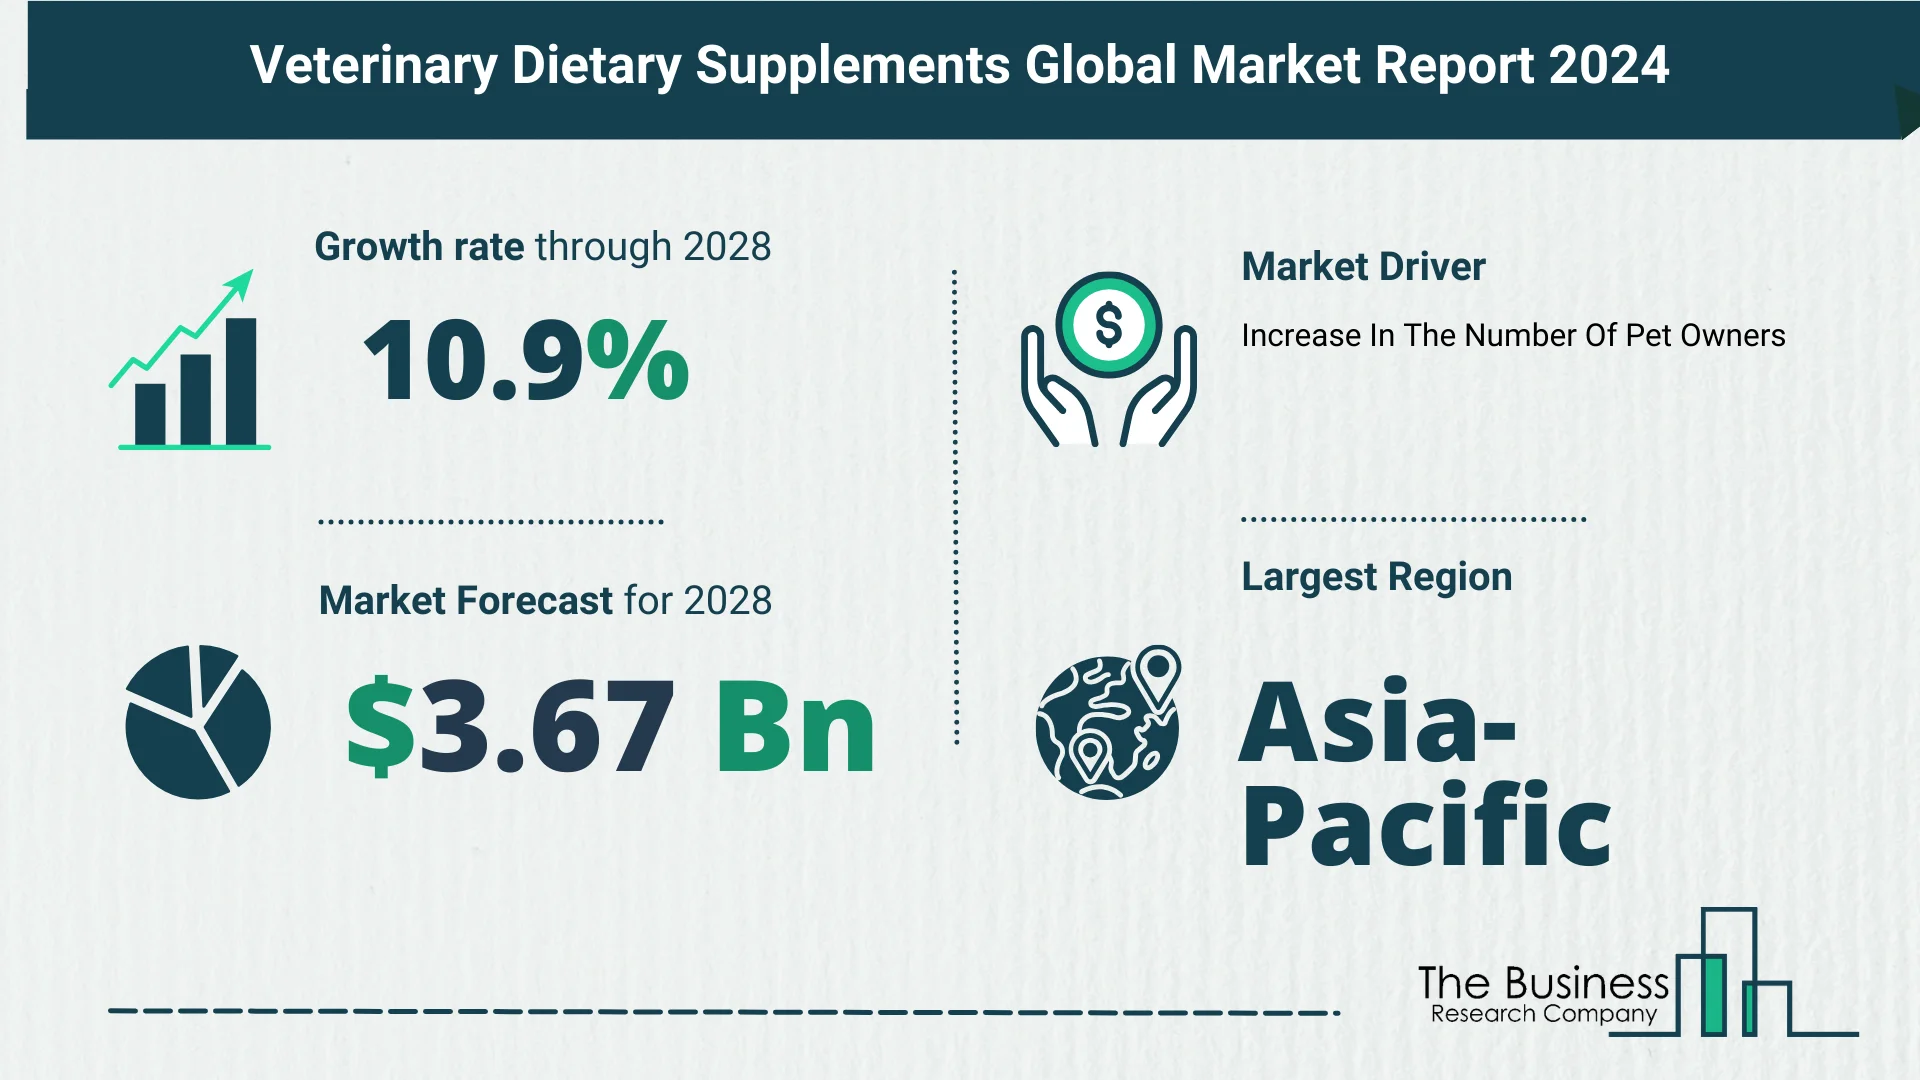 Global Veterinary Dietary Supplements Market Size